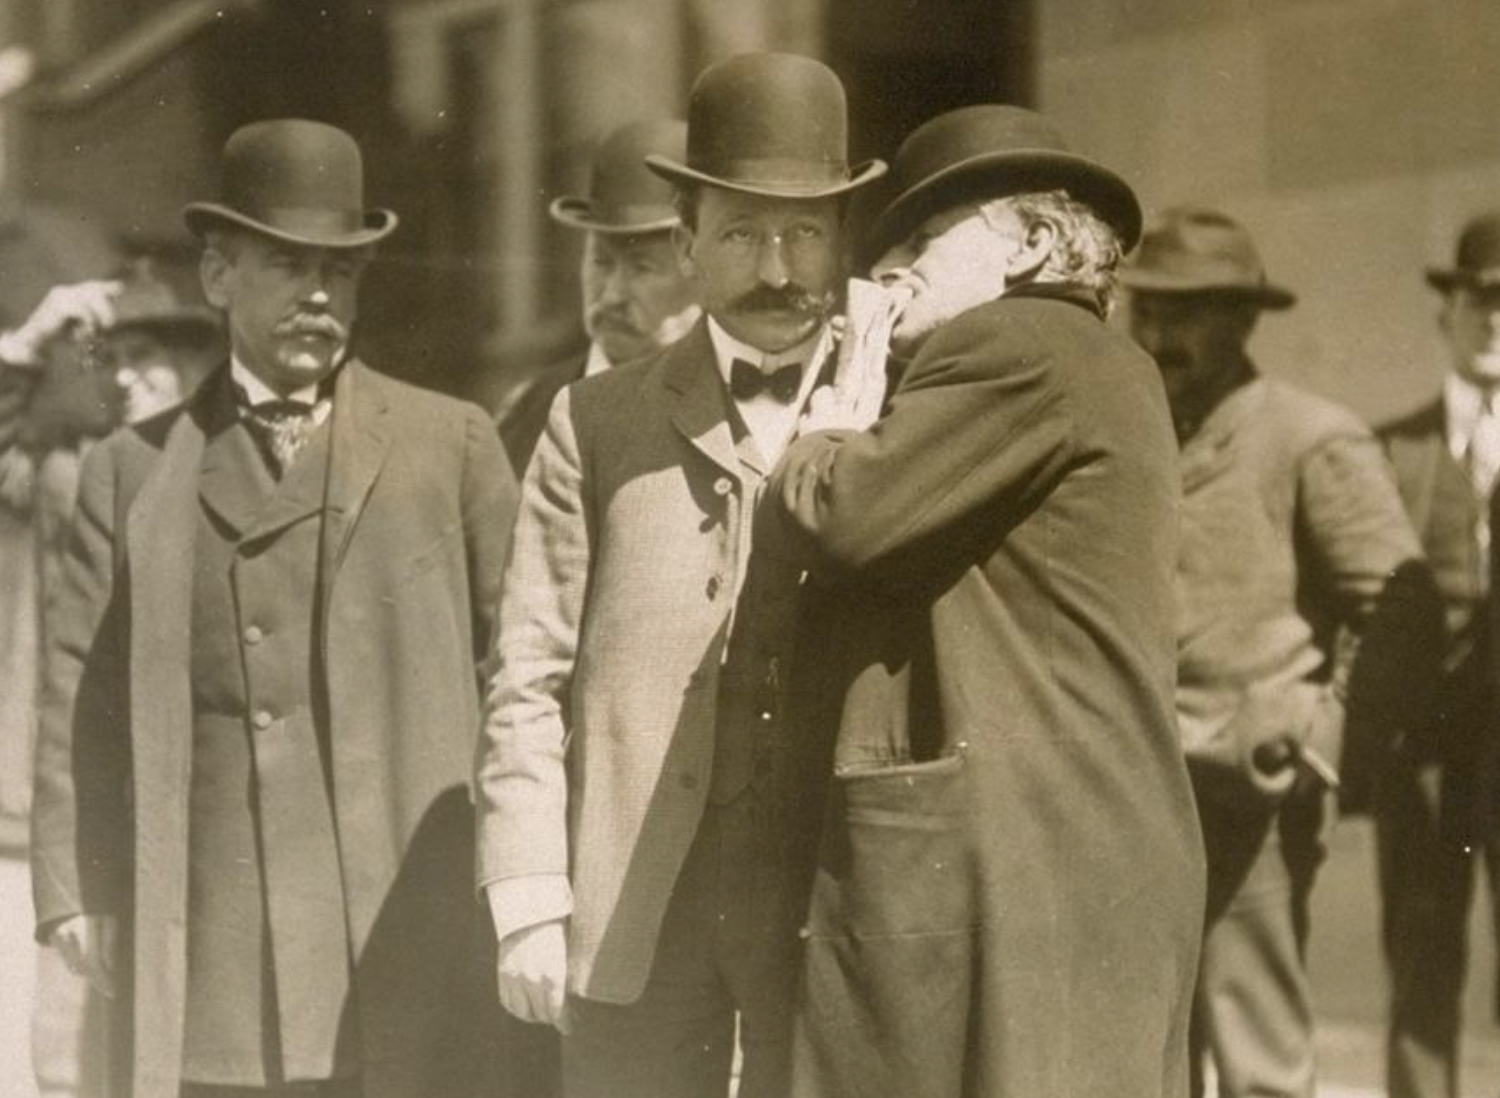 An archival photo of a man whispering in the ear of another man sometime in the early 1900s.